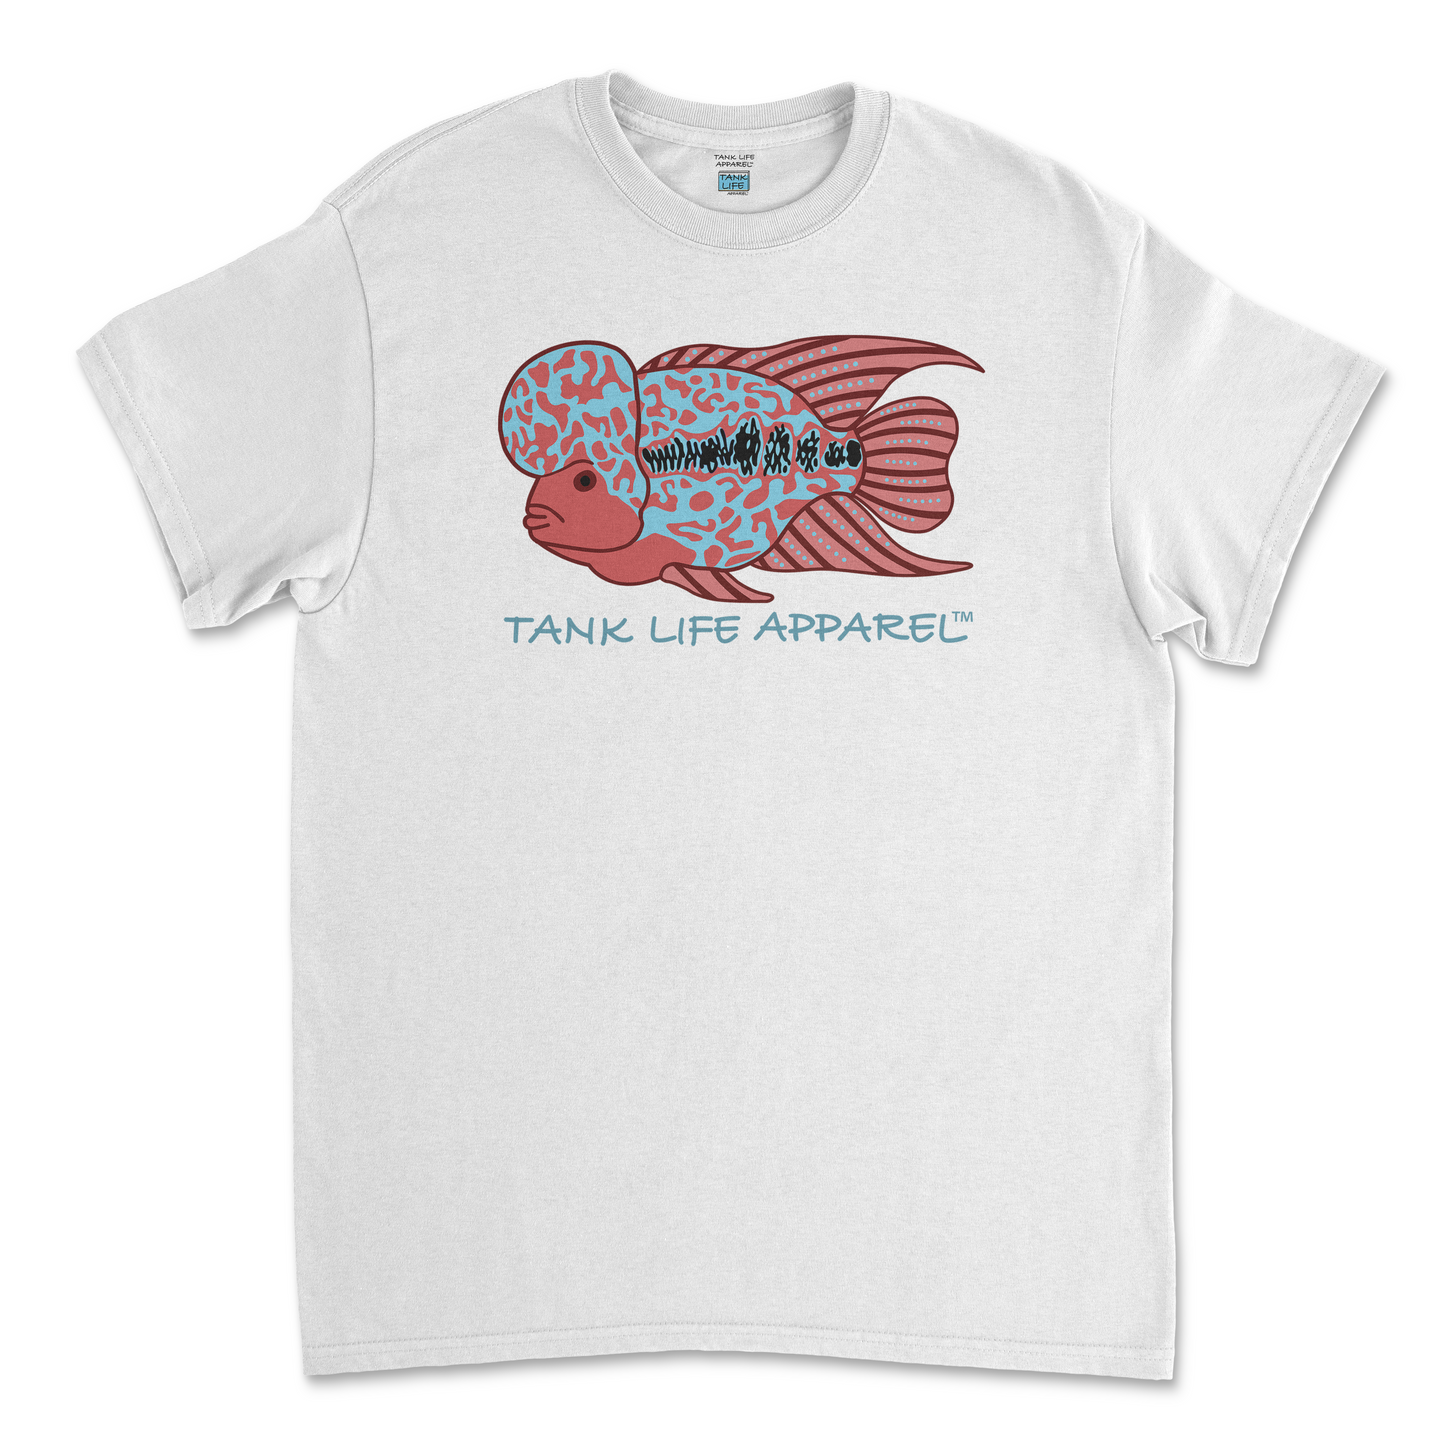 The Tank Life Apparel flowerhorn cichlid design on a youth tee. Blue and red pink fish with big hump on head.